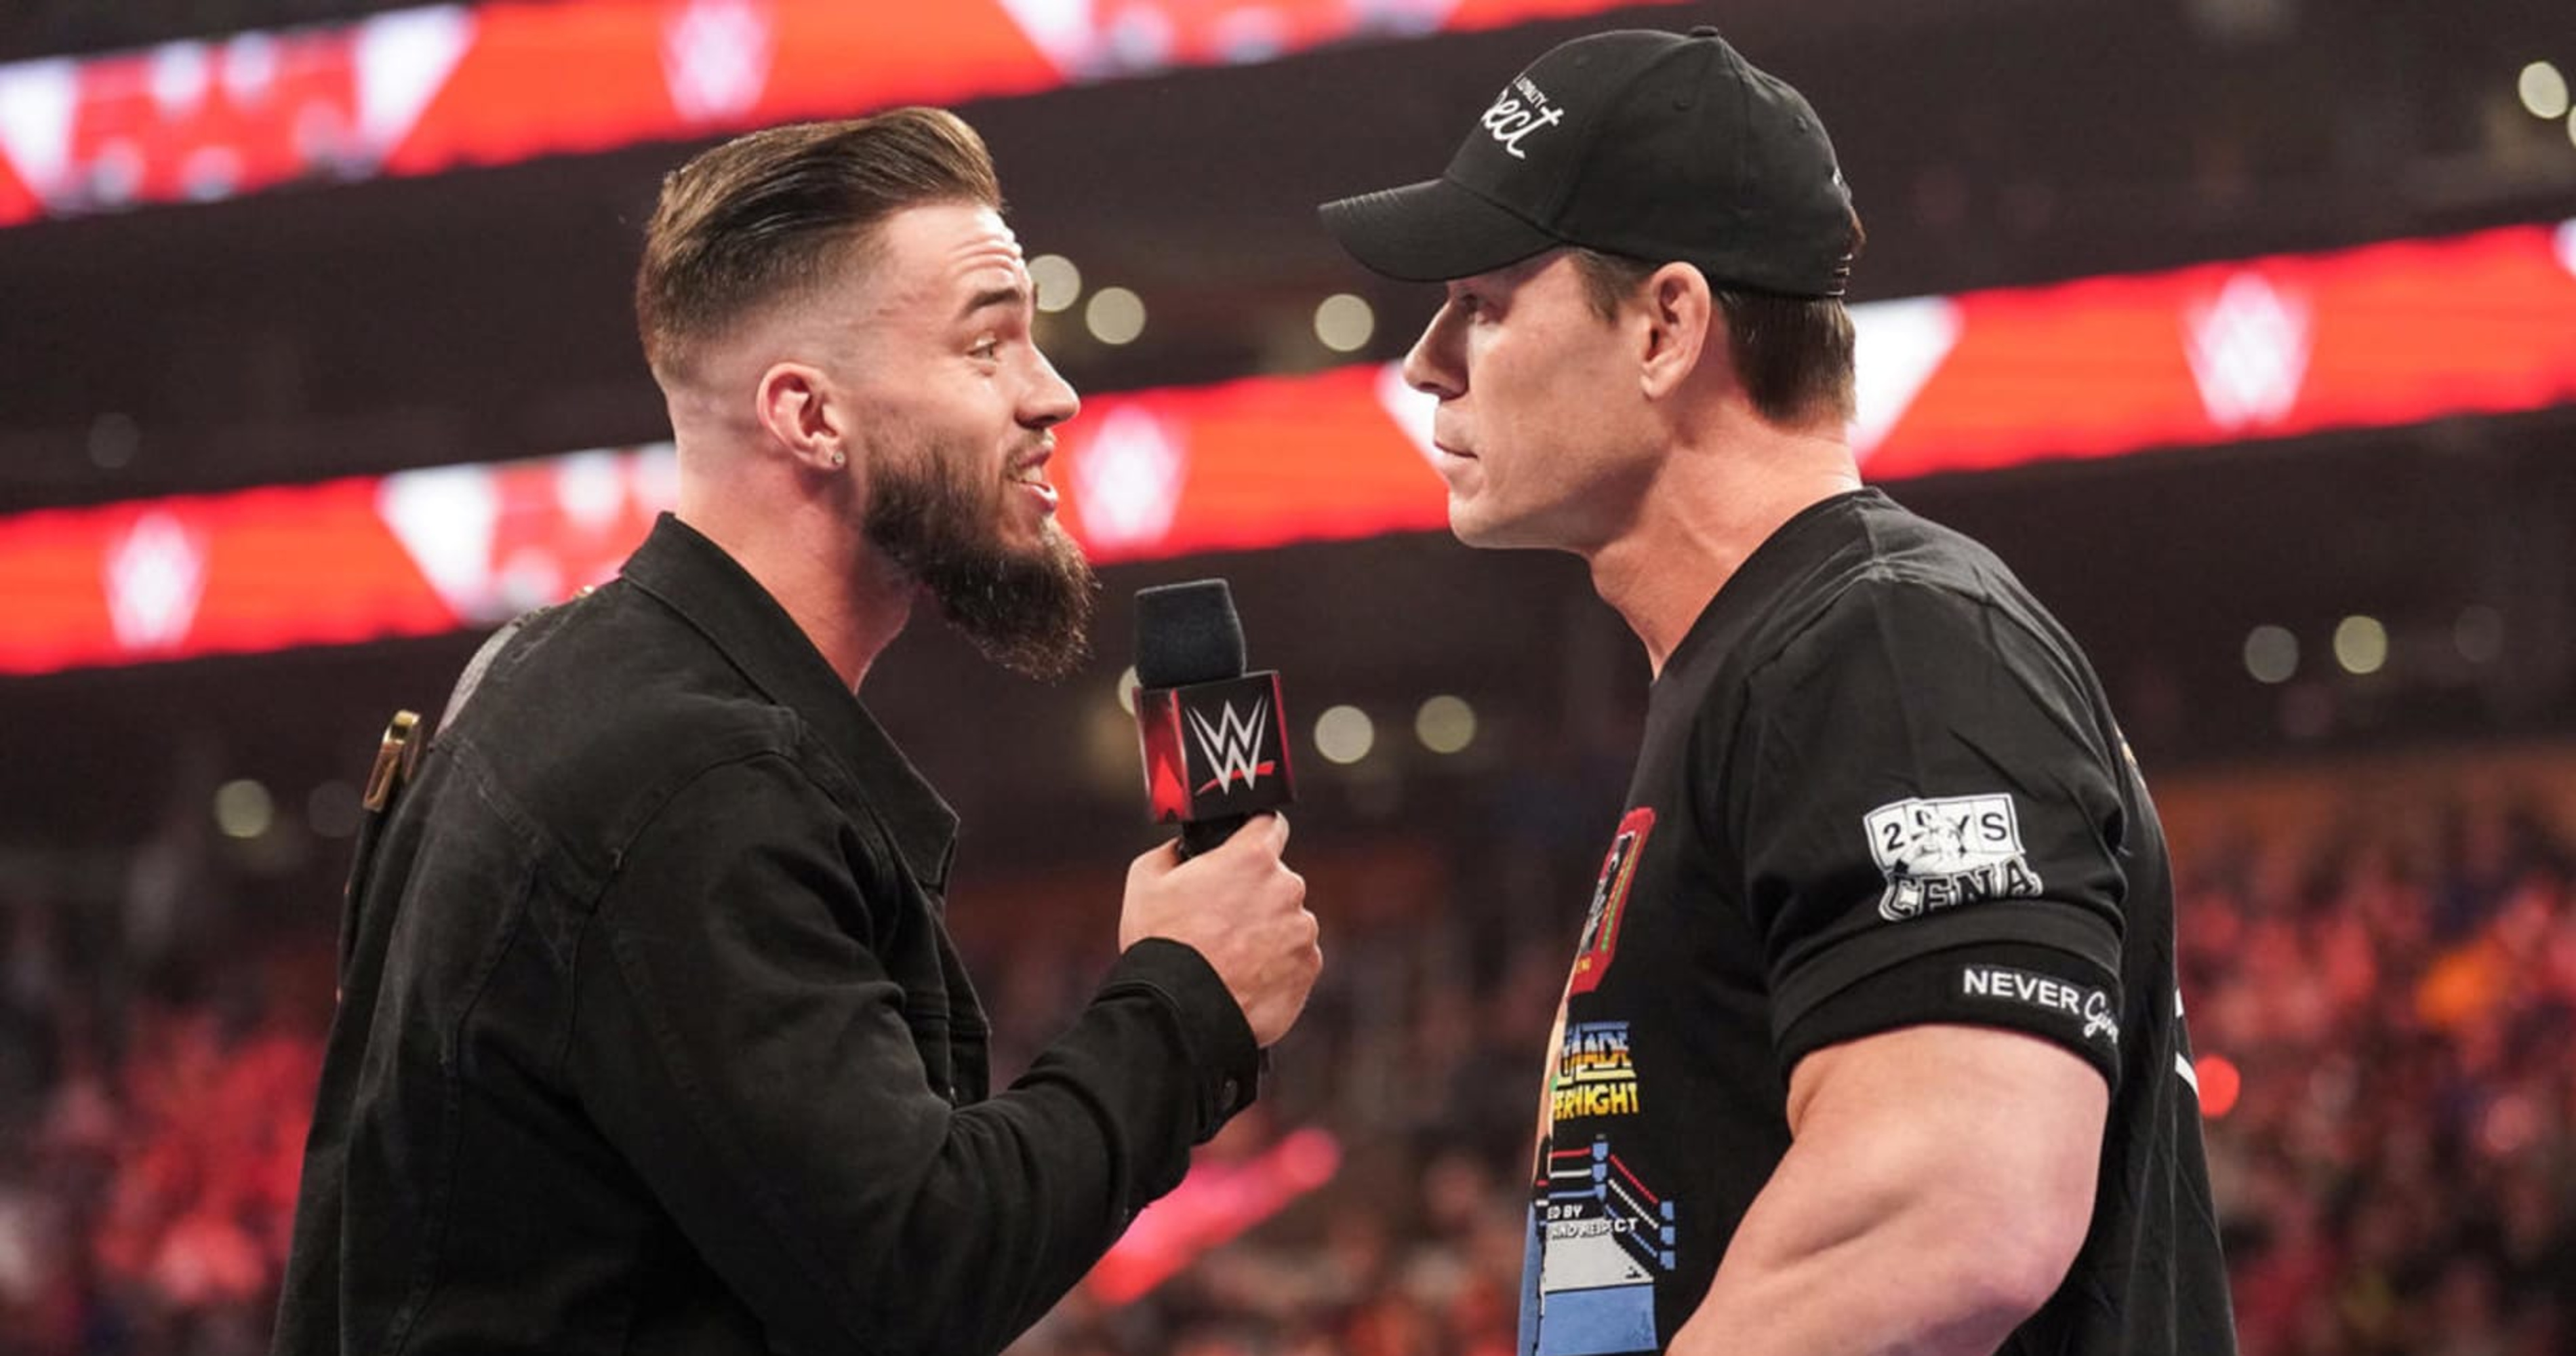 WWE News: WWE United States Champion Austin Theory isn't intimidated by WWE Legend John Cena, reveals his mindset going into Wrestlemania 39, Follow Live Updates